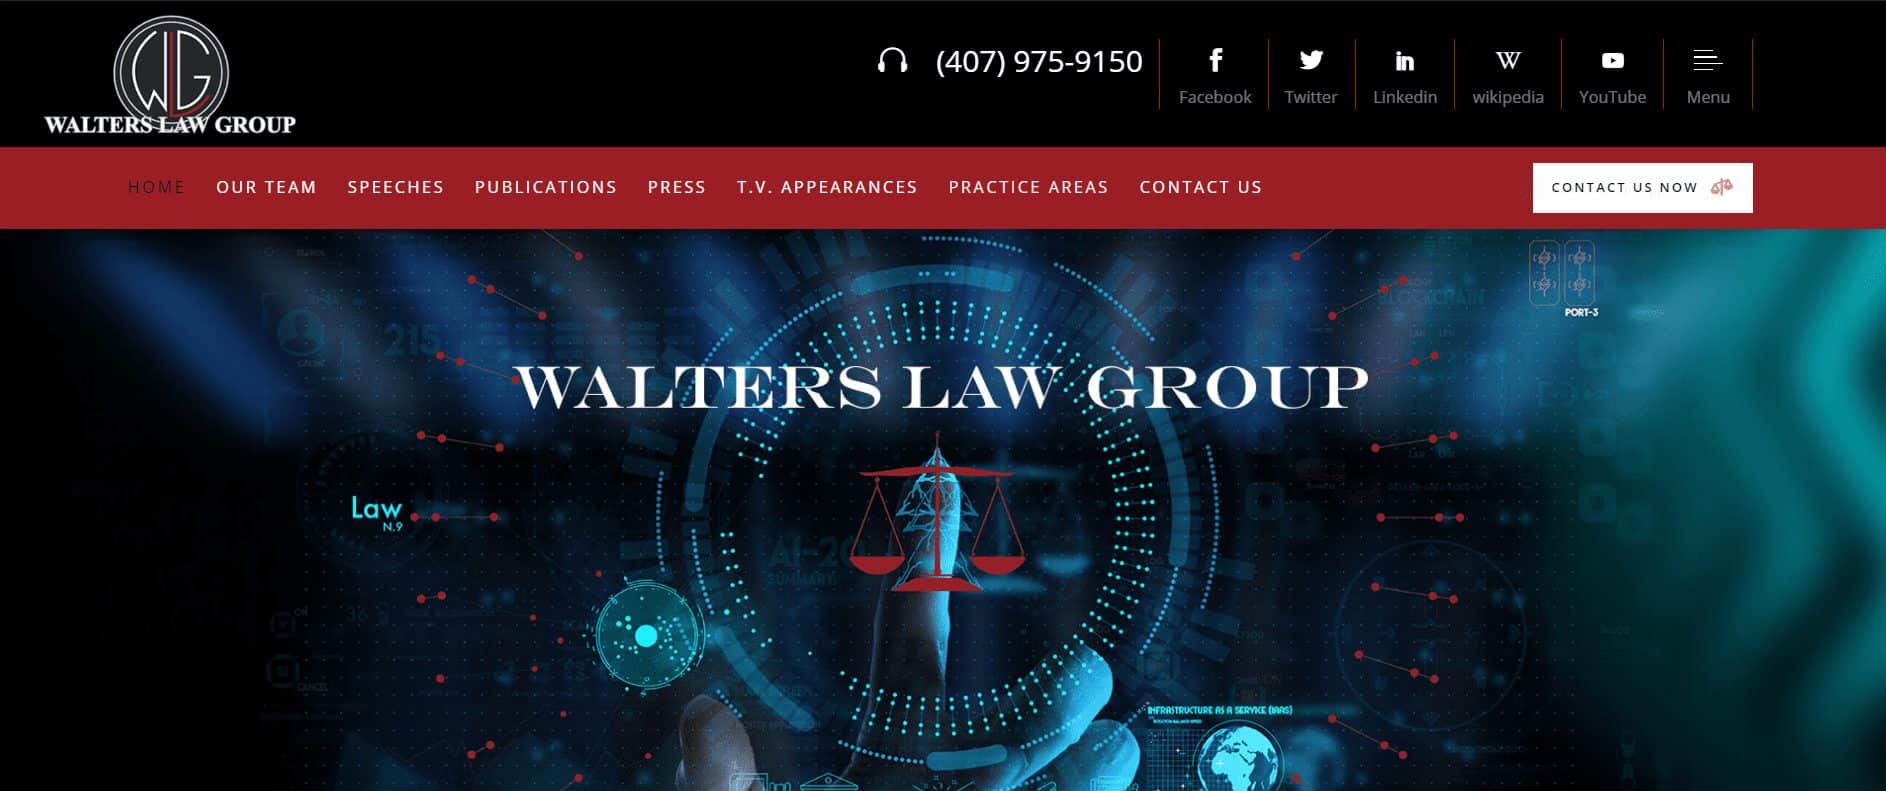 Walters Law Group - SEO Client of Media Pillars